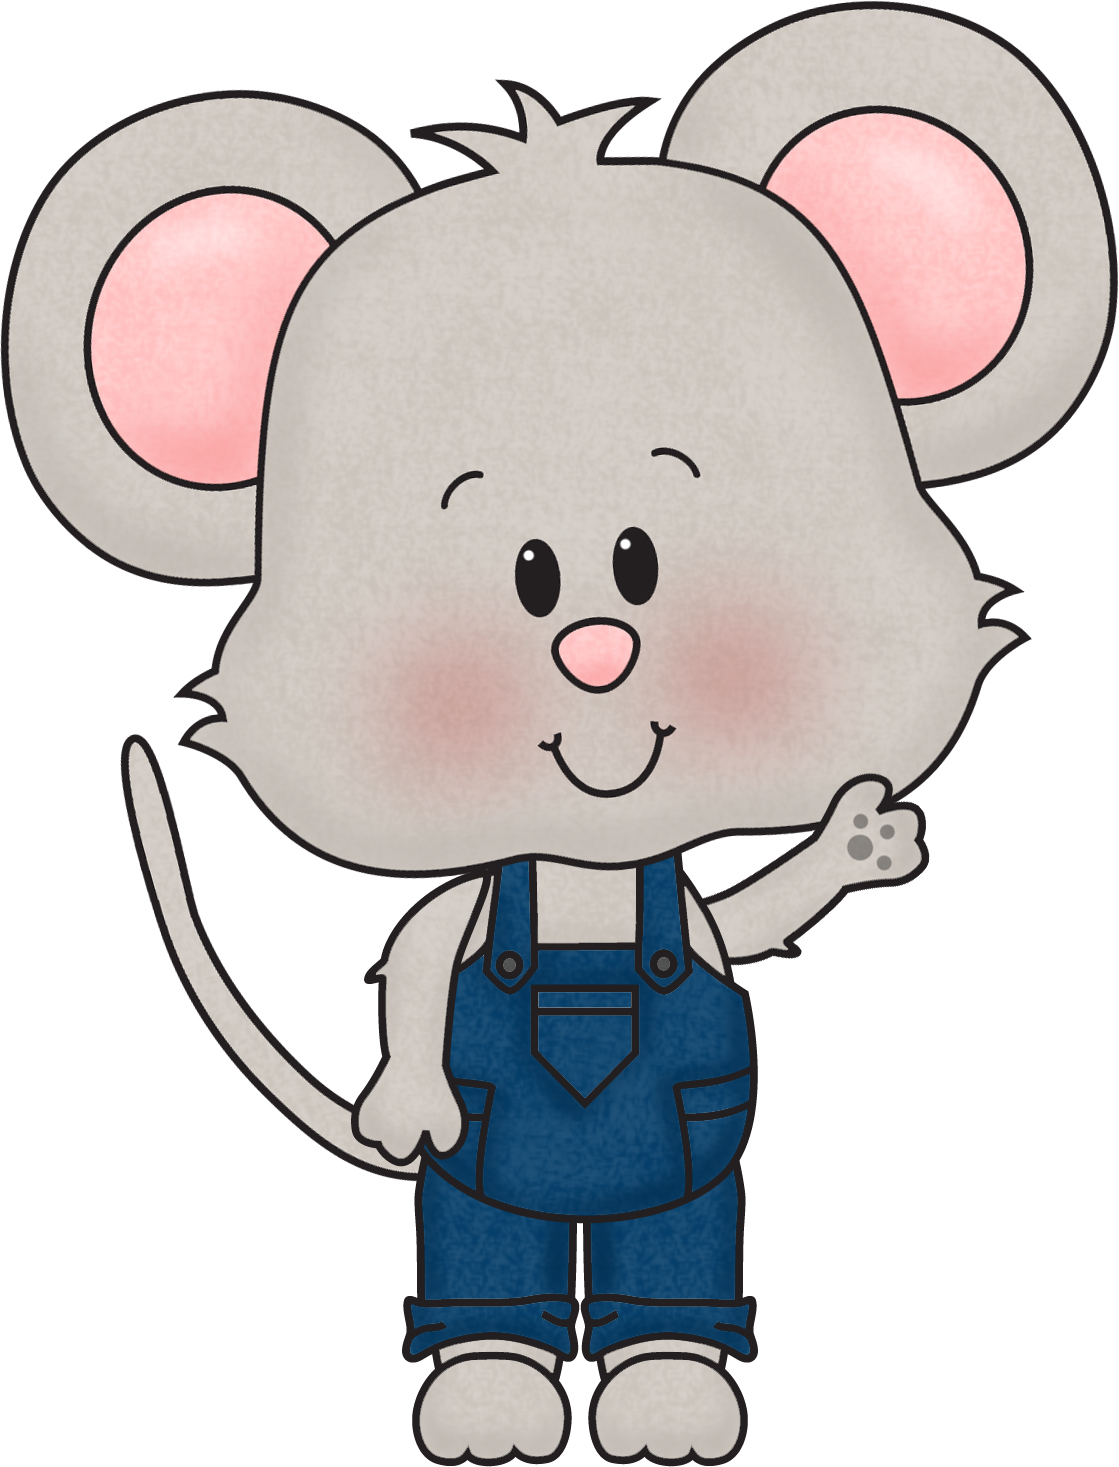 Mouse Cheese Clipart   Clipart Panda   Free Clipart Images